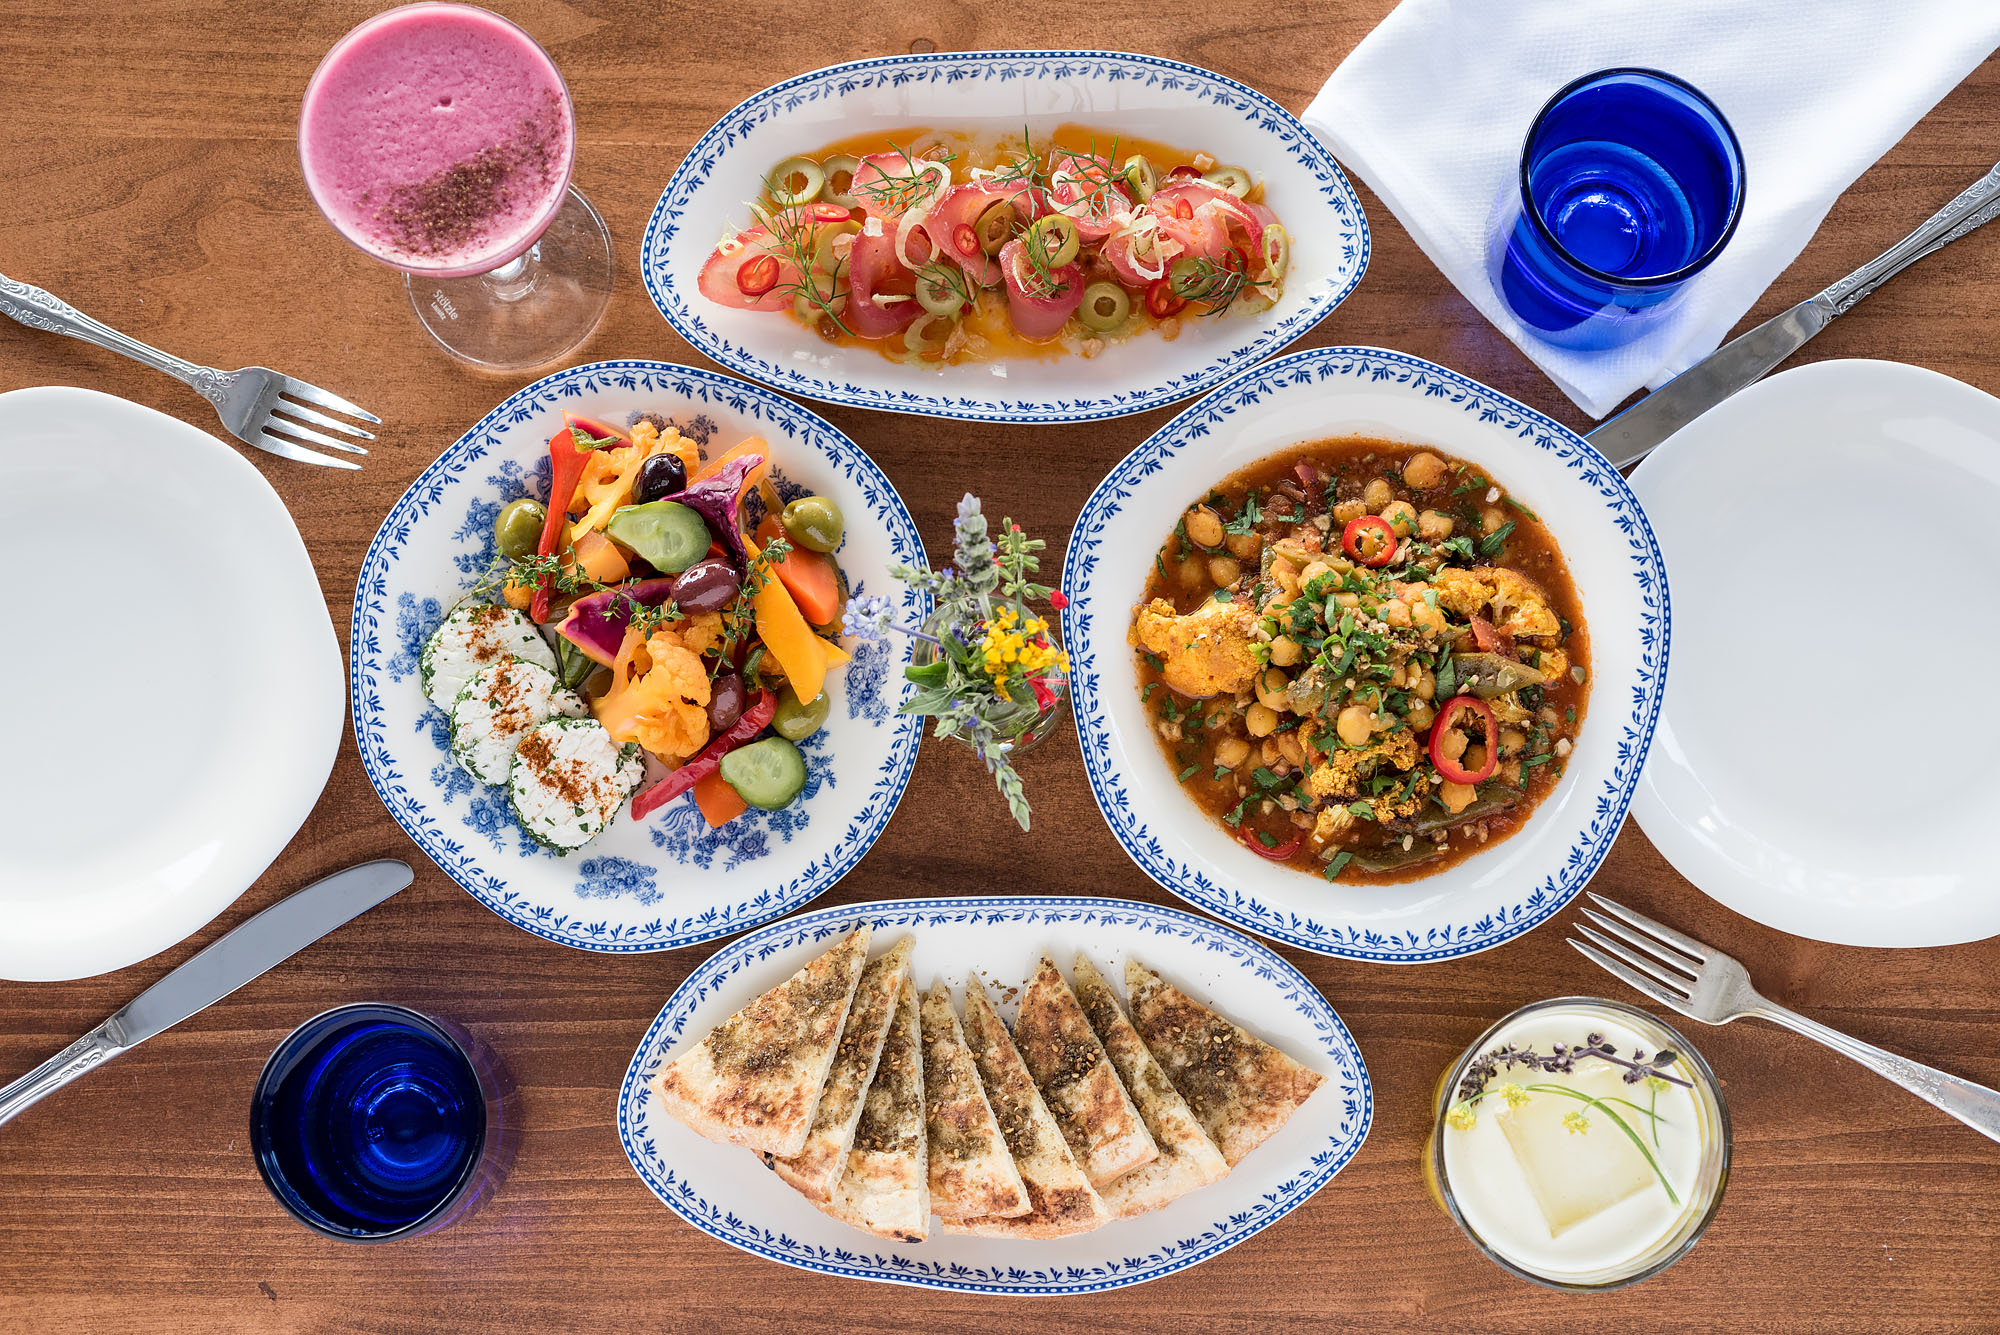 Array of dishes on white and blue plates at Jaffa restaurant